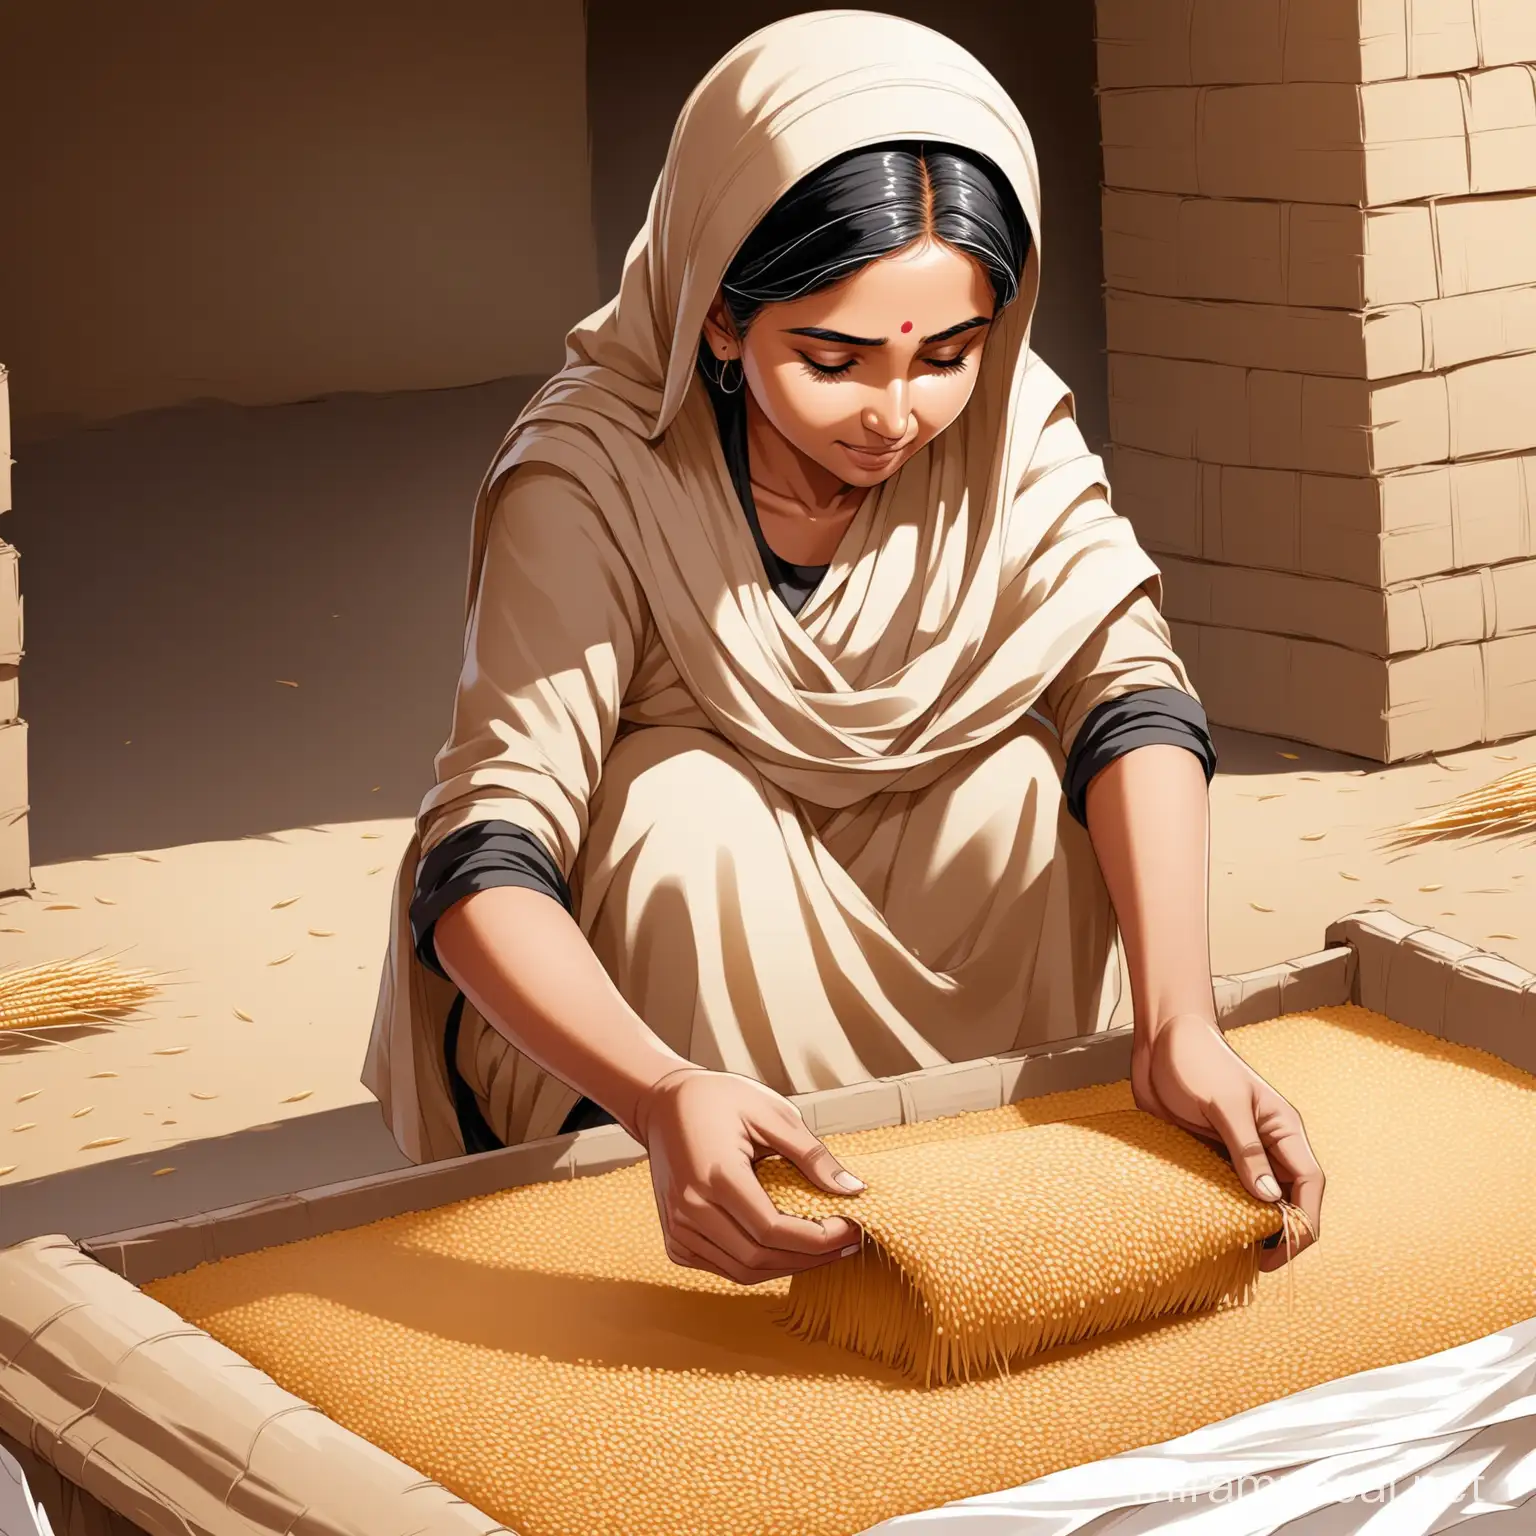 Pakistani Woman Crafting Recycled Paper from Wheat Agricultural Waste